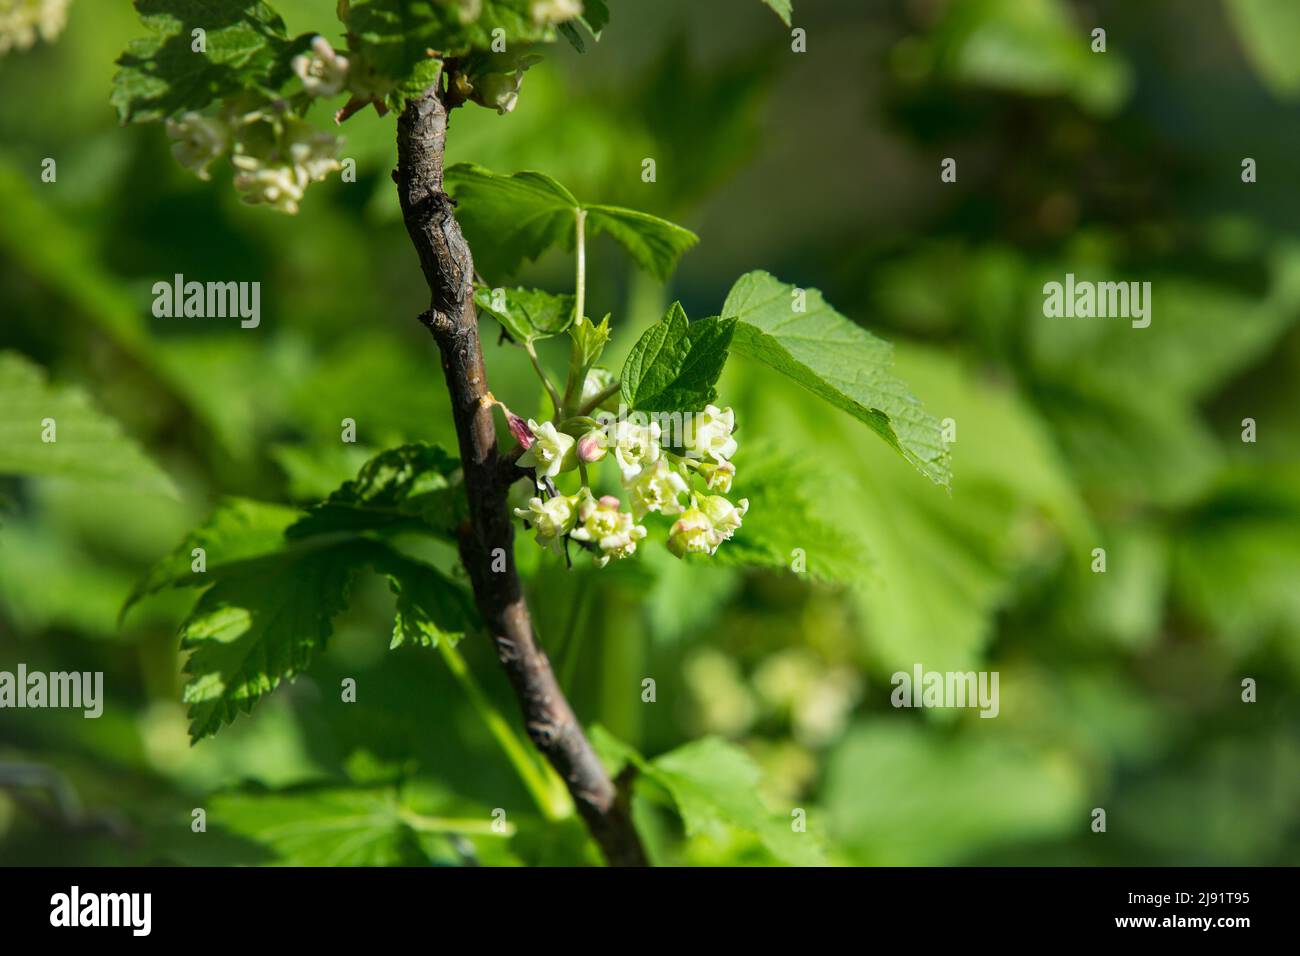 Flowering bush of black currant with green leaves in the garden. Green flowers in the garden. Unripe berries of a currant close-up. Stock Photo